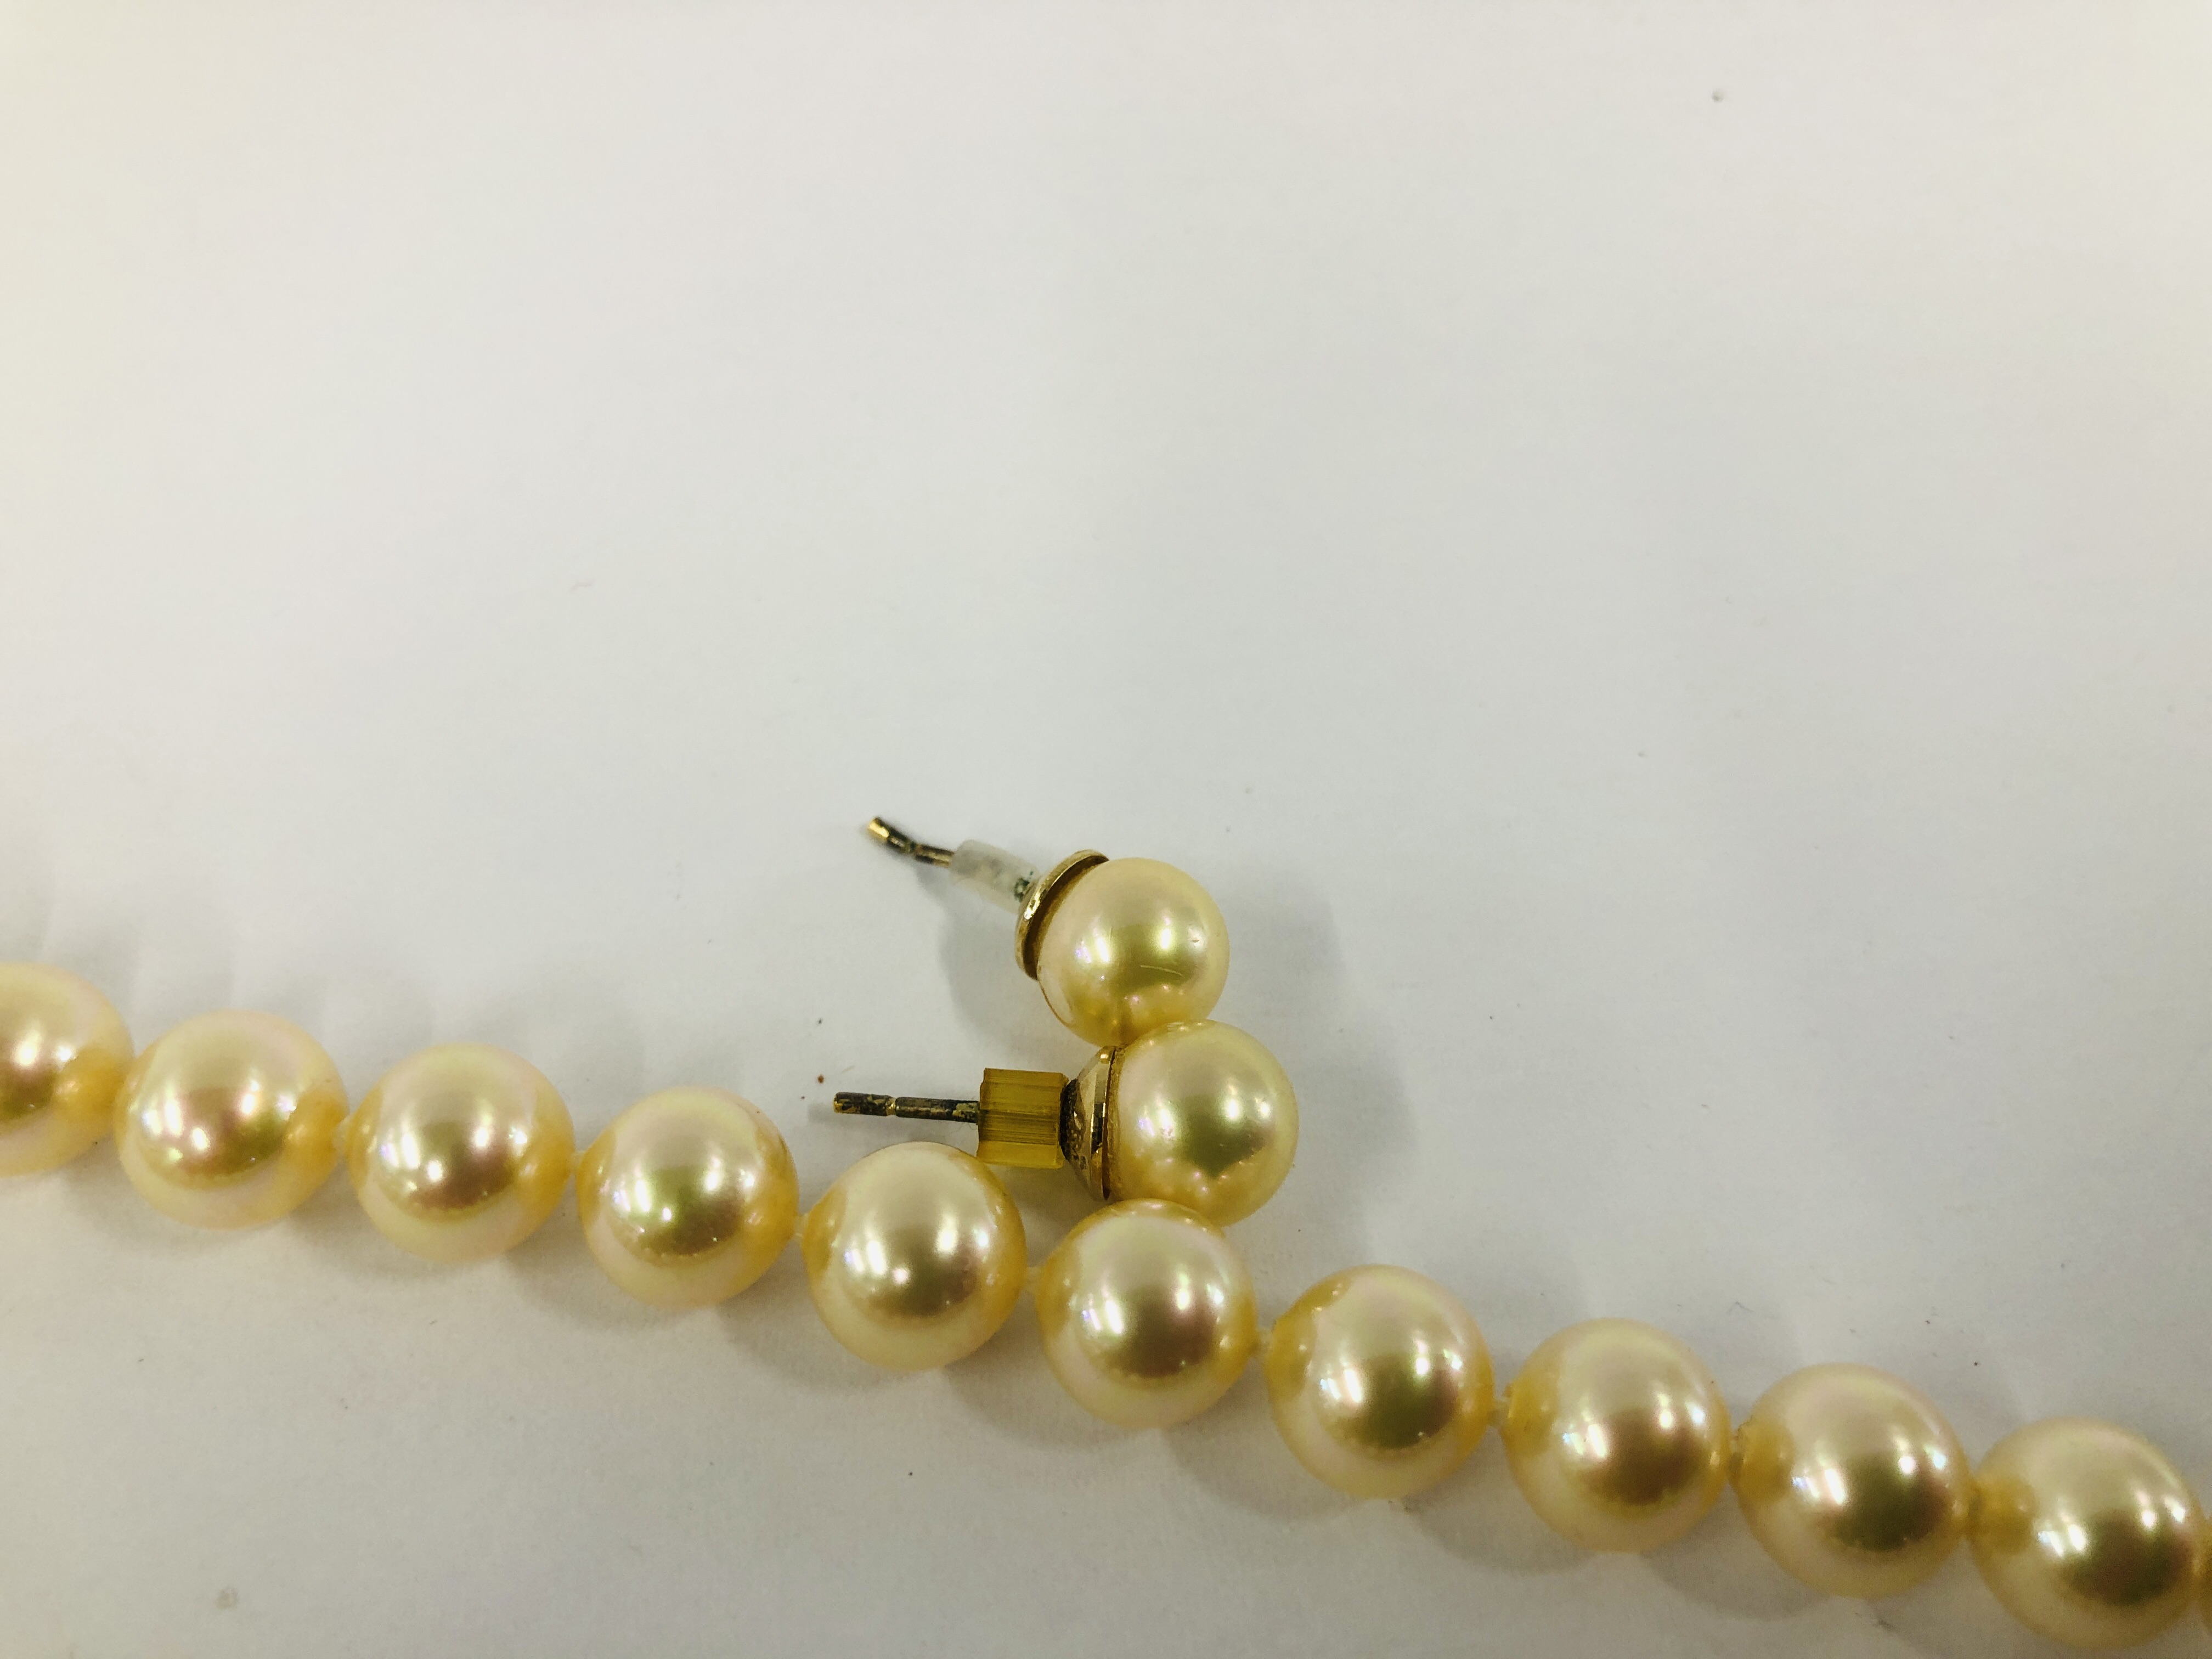 A MODERN STRAND OF "MAJORICAN" SIMULATED PEARLS HAVING A CLASP MARKED 925 ALONG WITH A PAIR OF - Image 7 of 9